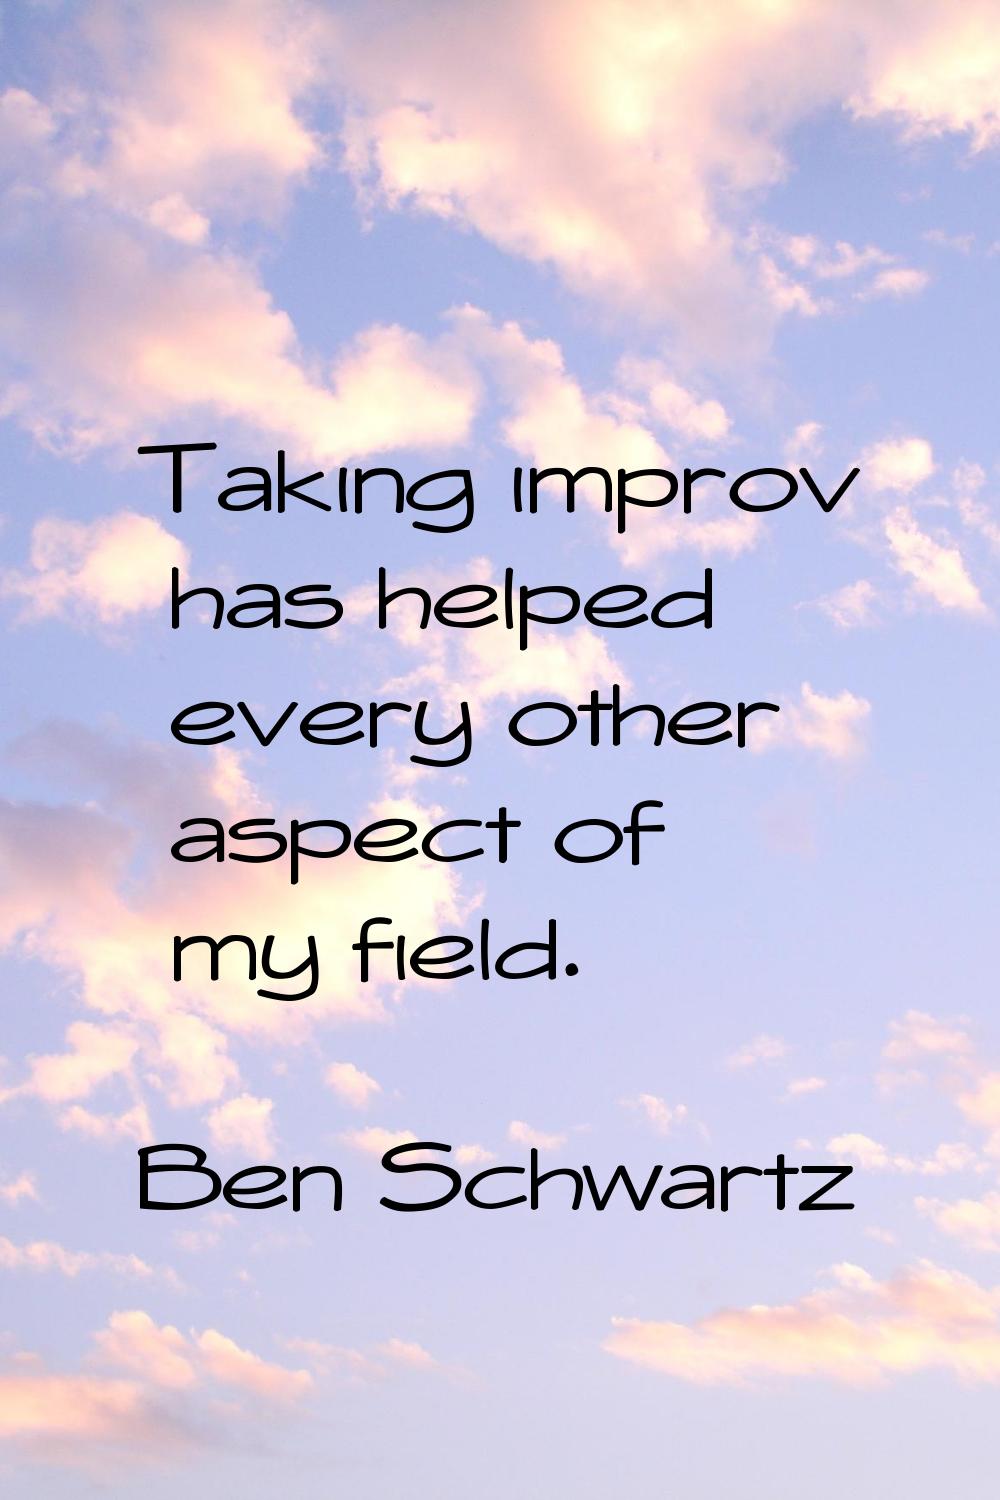 Taking improv has helped every other aspect of my field.